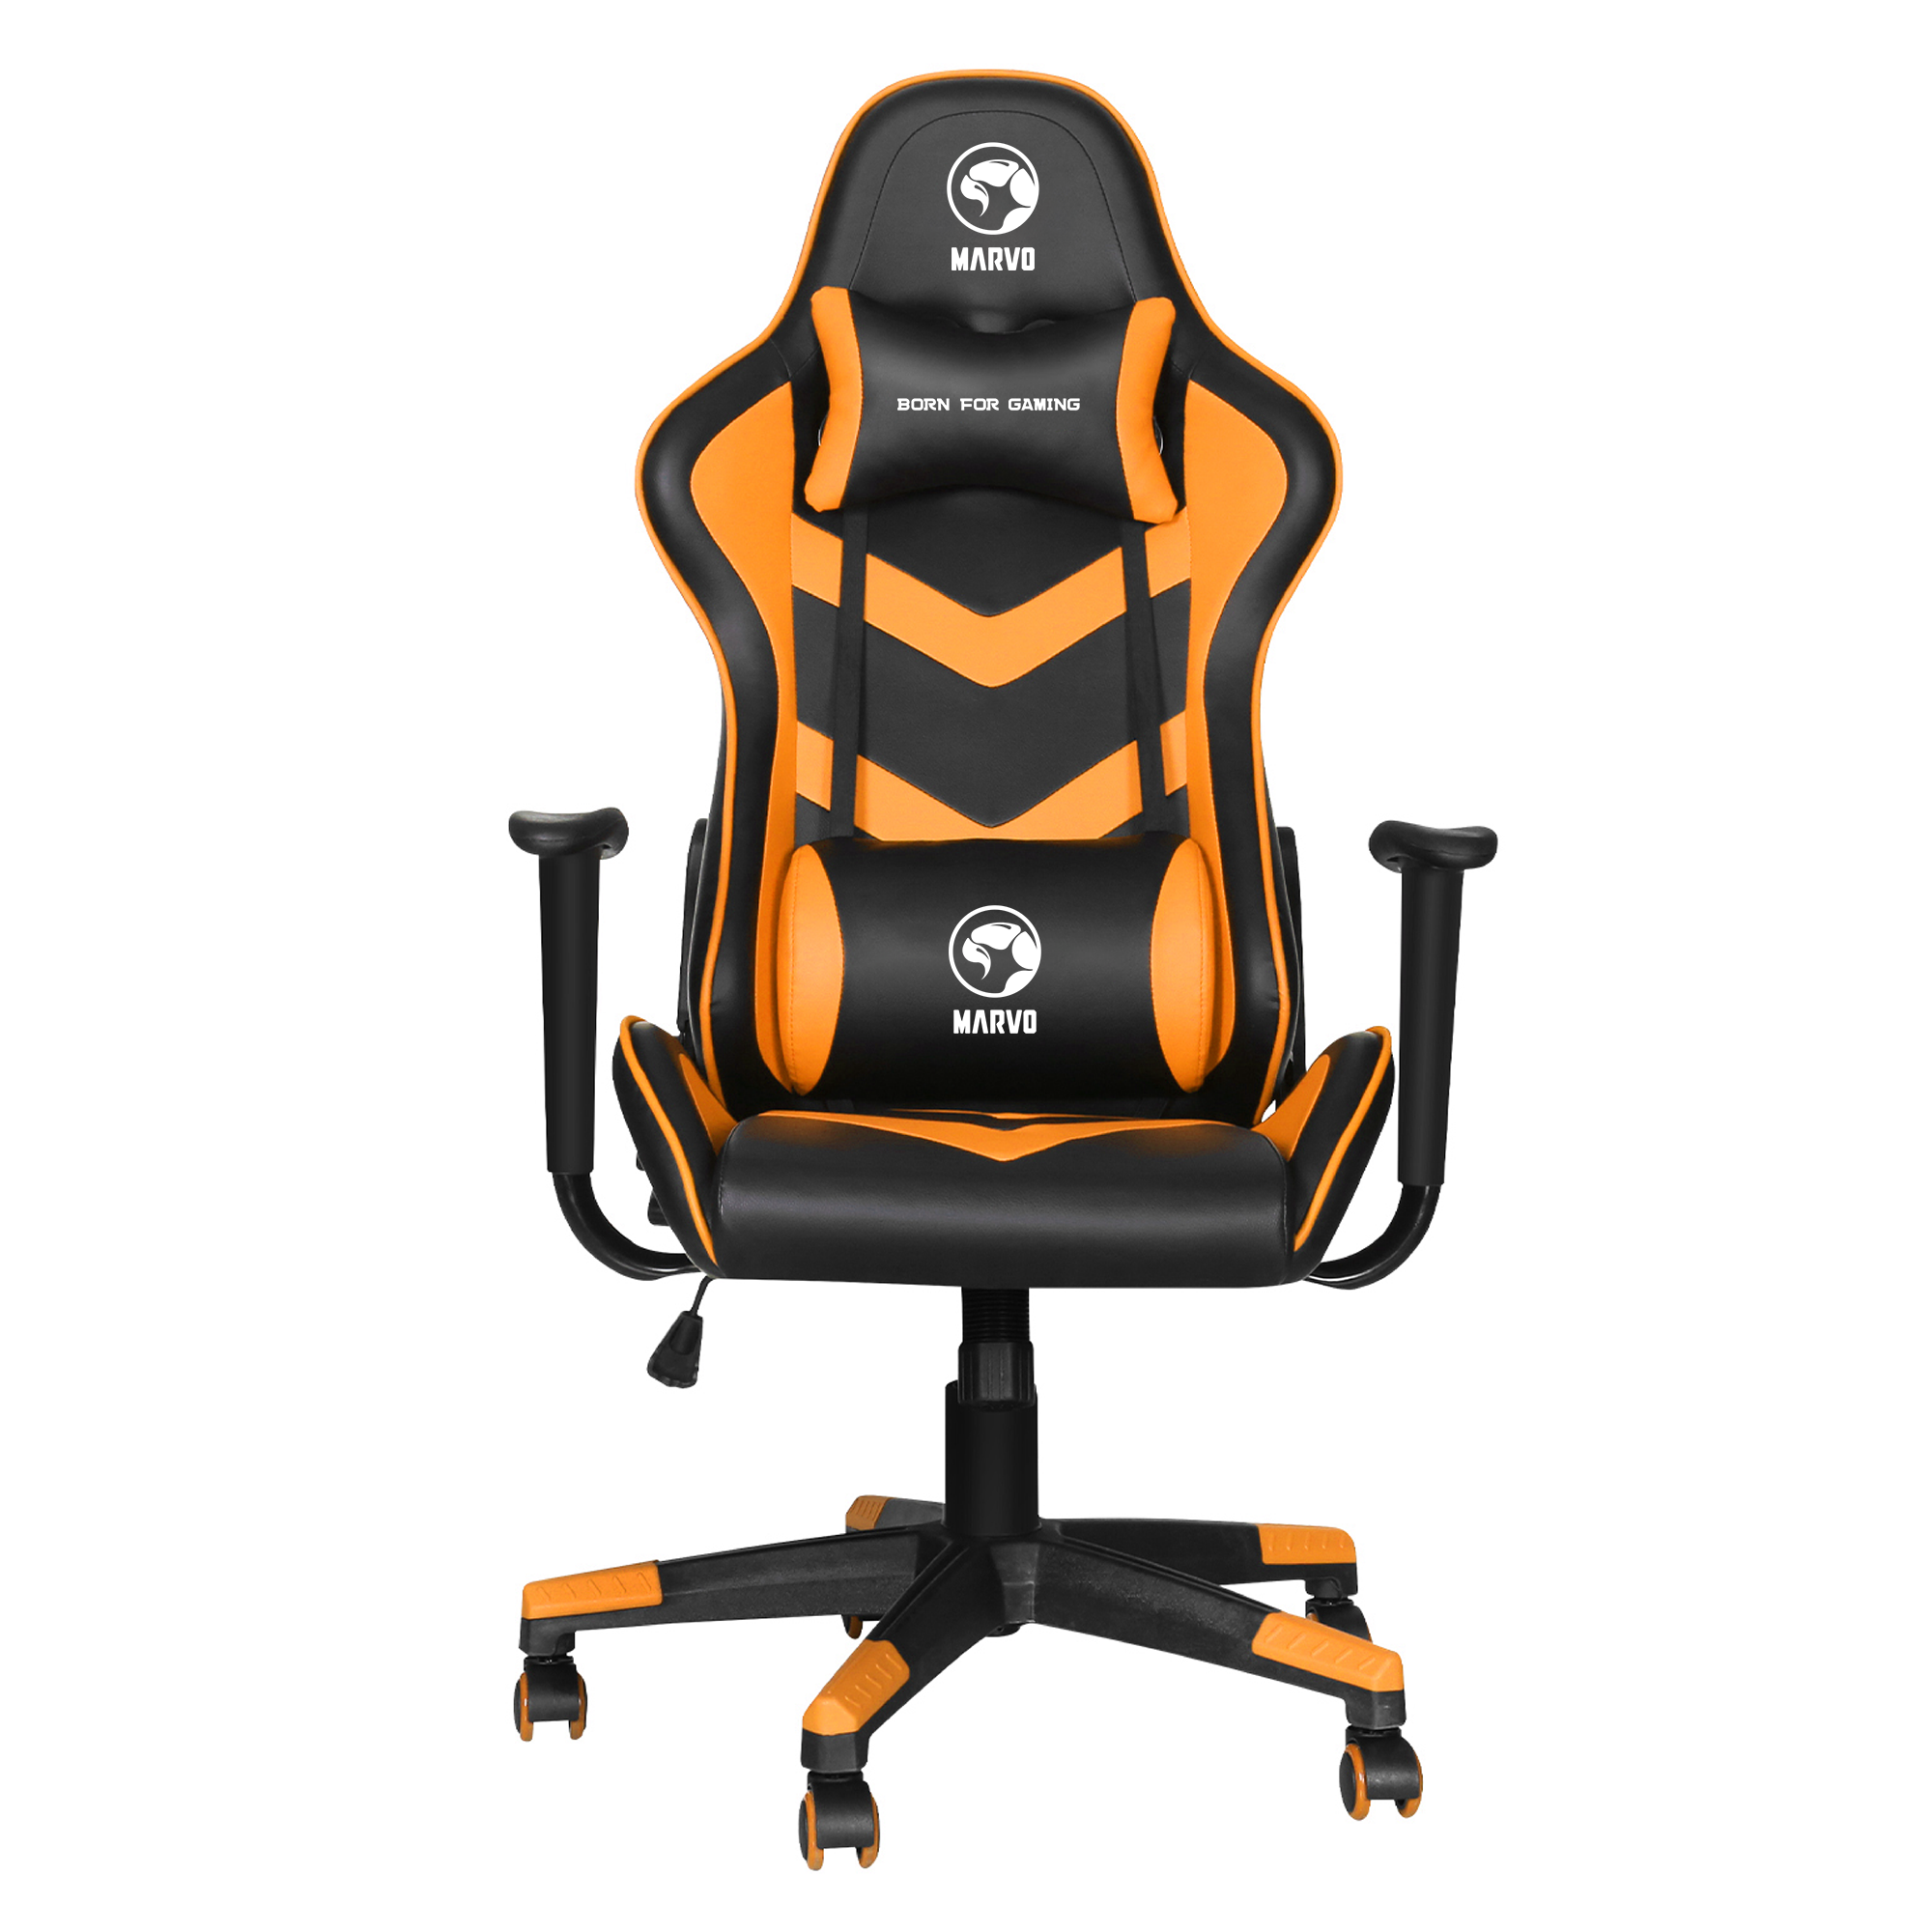 Marvo Tech Accessories Yellow Gaming Chair